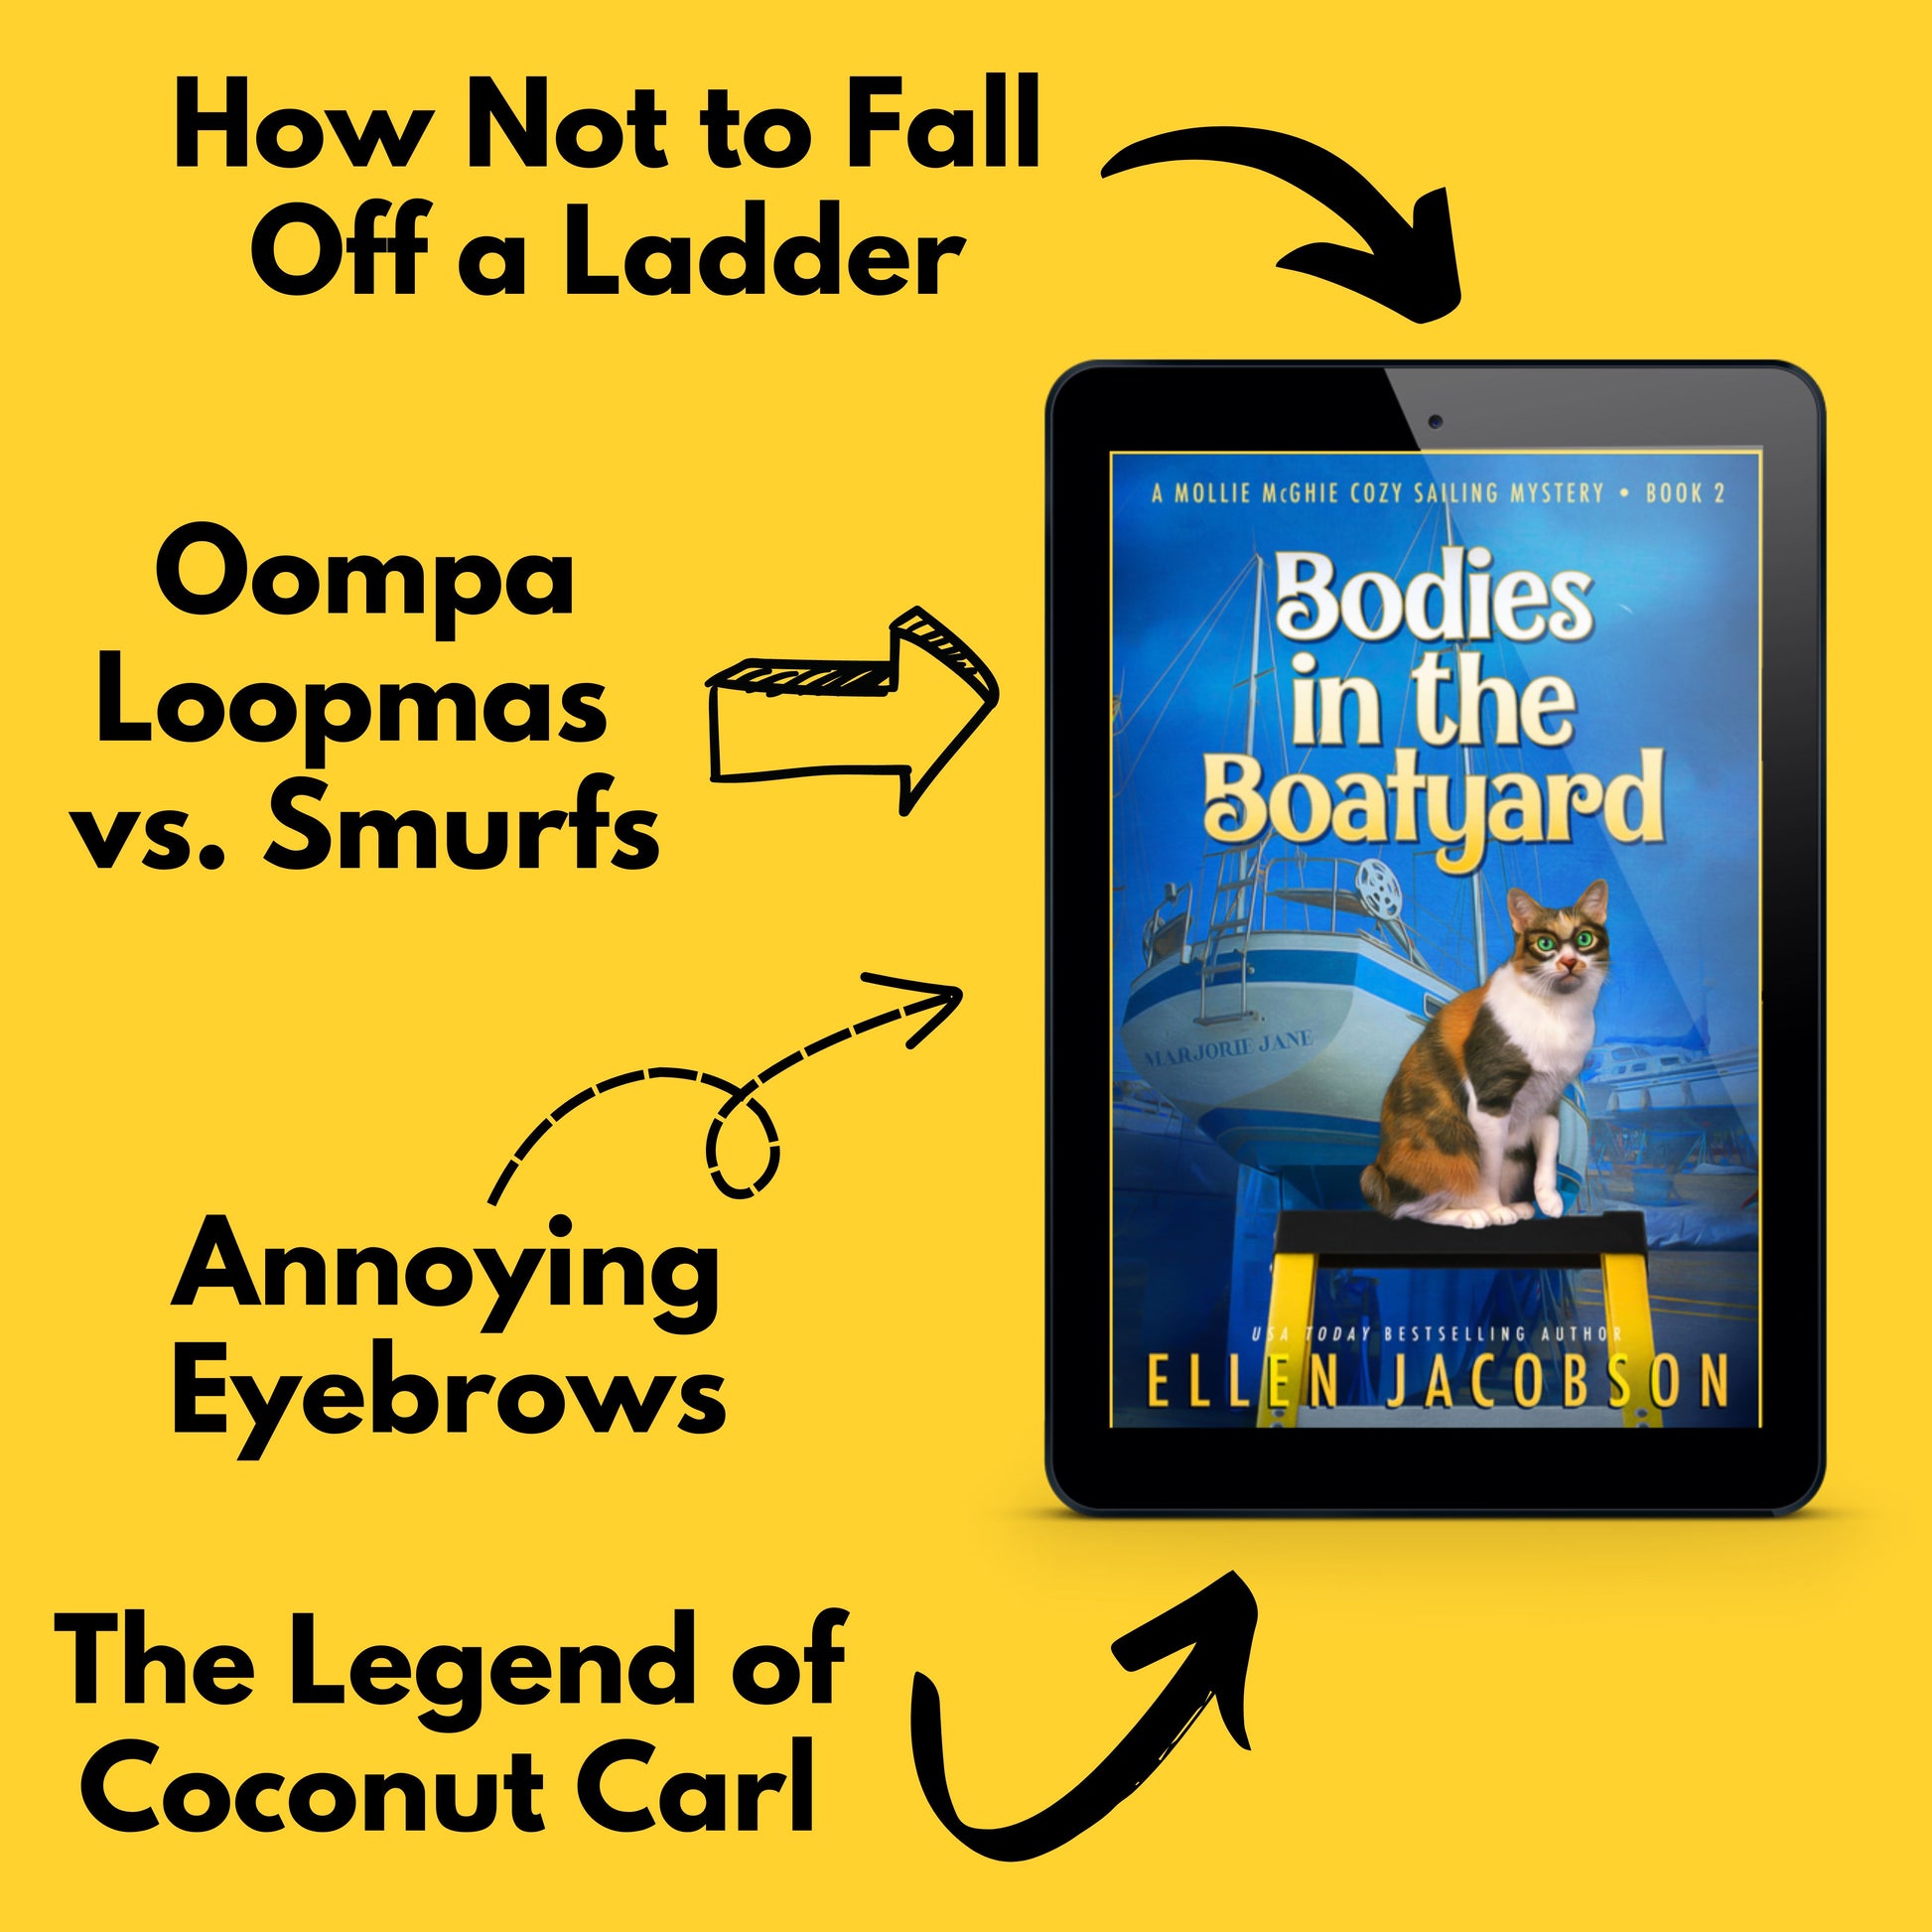 Bodies in the Boatyard (Mollie McGhie Cozy Mystery #2) ebook cover with text that says how not to fall off a ladder, oompa loompas versus smurfs, annoying eyebrows, and the legend of Coconut Carl